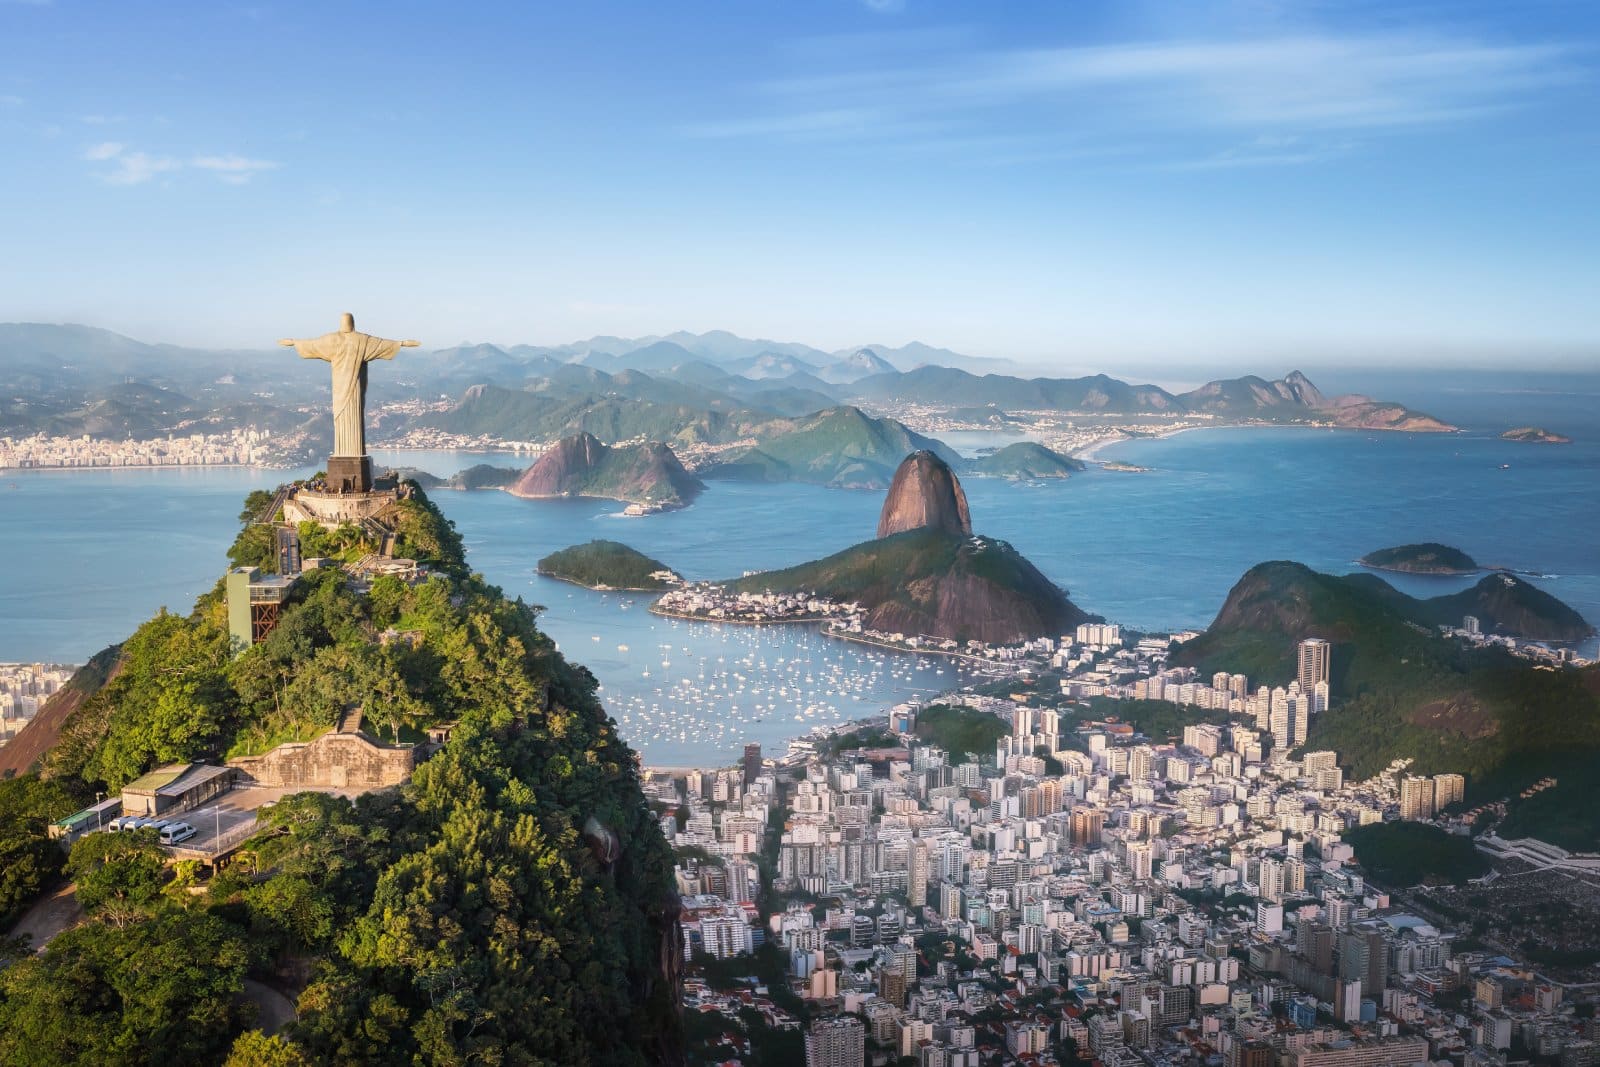 <p class="wp-caption-text">Image Credit: Shutterstock / Diego Grandi</p>  <p>From the heights of Sugarloaf Mountain to the vibrant festivities of Carnival, Rio is a city of breathtaking beauty and endless energy.</p>